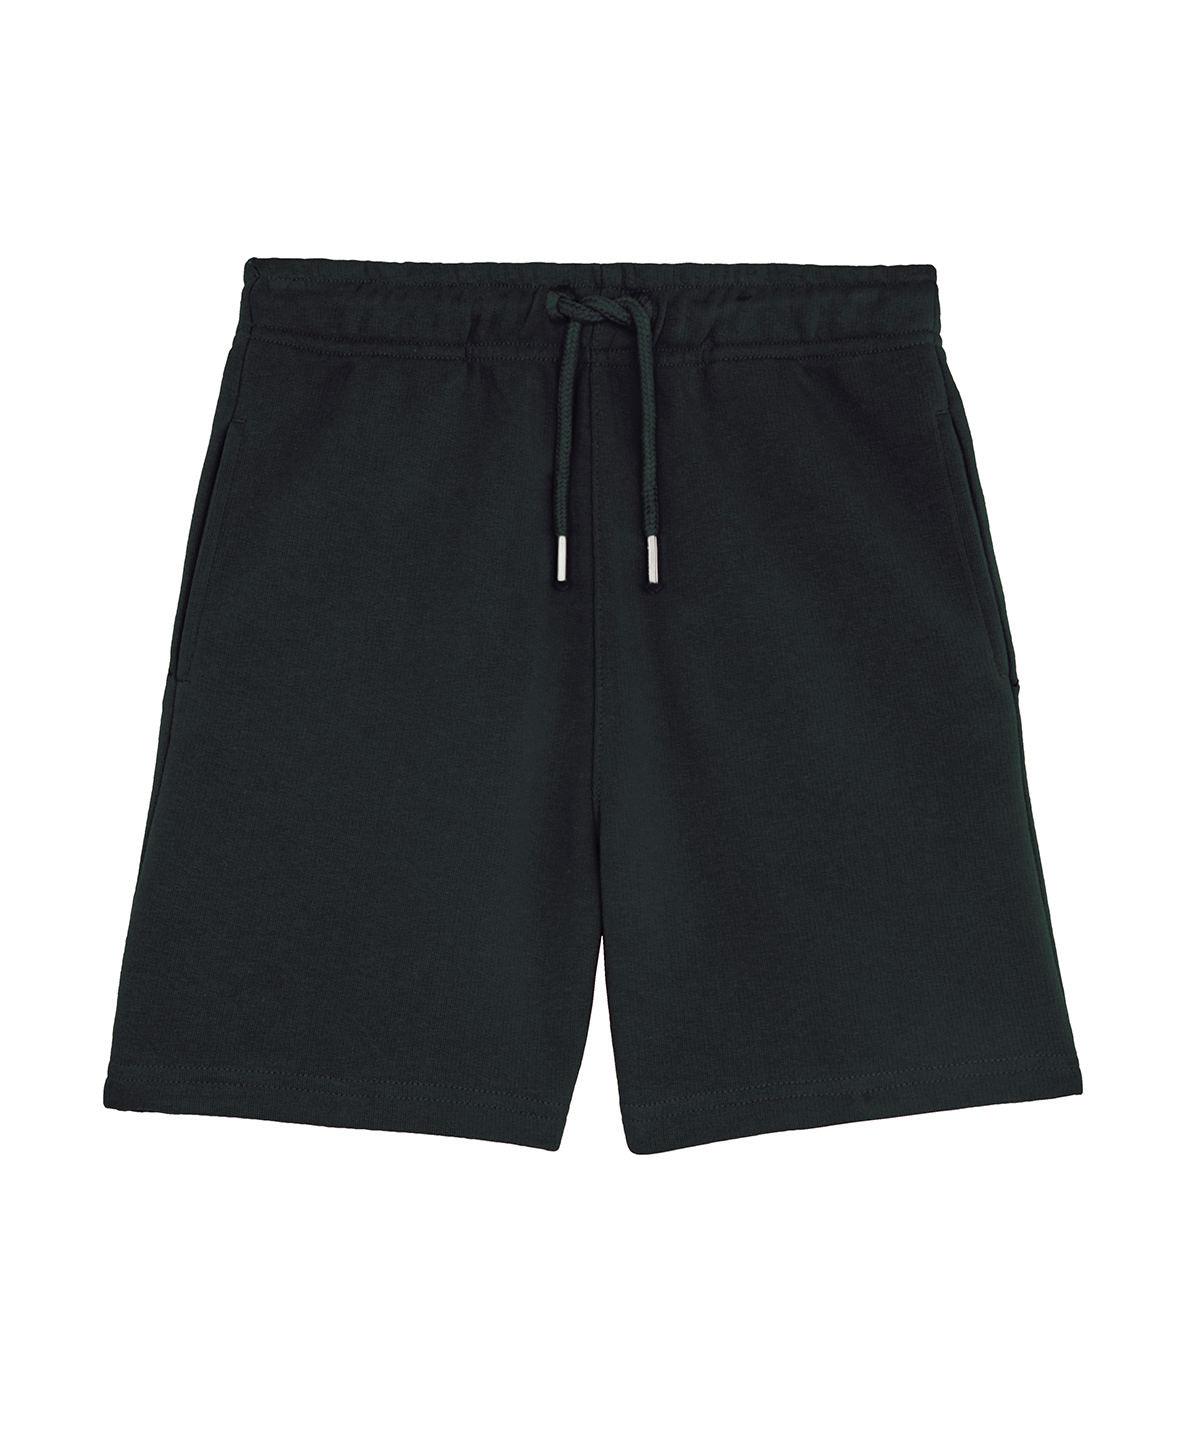 Black - Mini Bolter kids shorts (STBK102) Shorts Stanley/Stella New Styles for 2023, Organic & Conscious, Rebrandable, Trousers & Shorts Schoolwear Centres